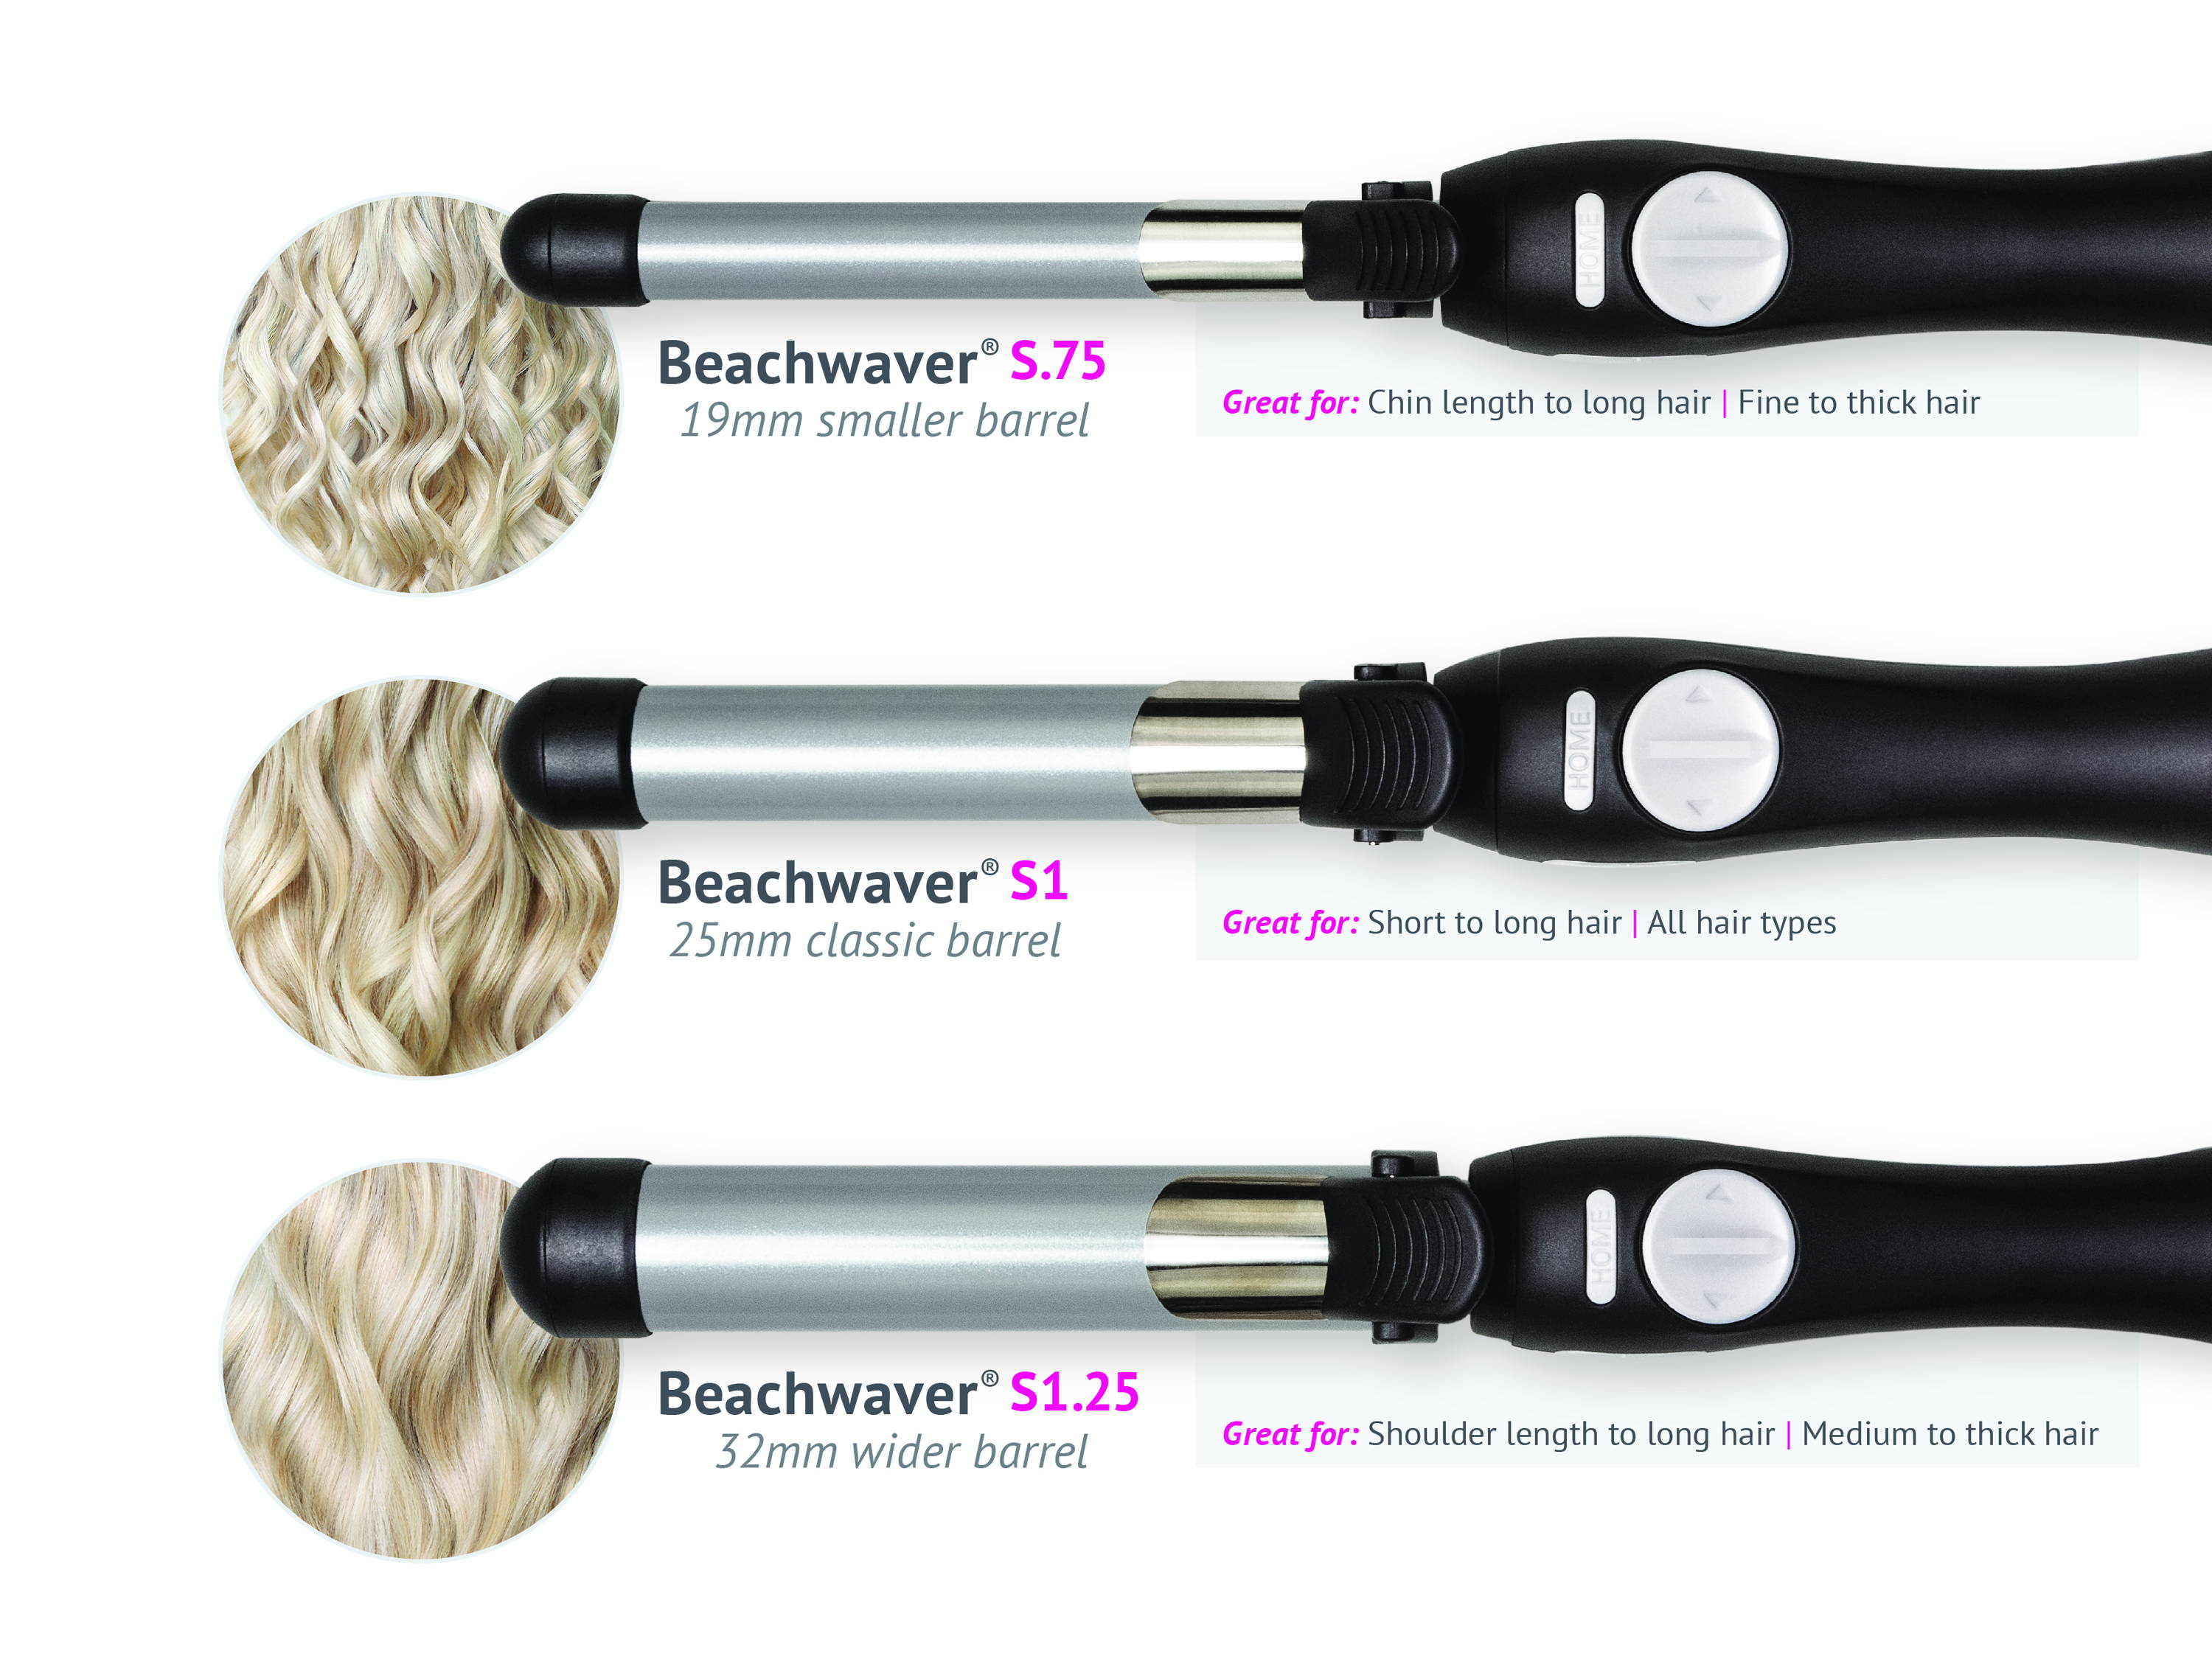 Find the right Beachwaver for you!